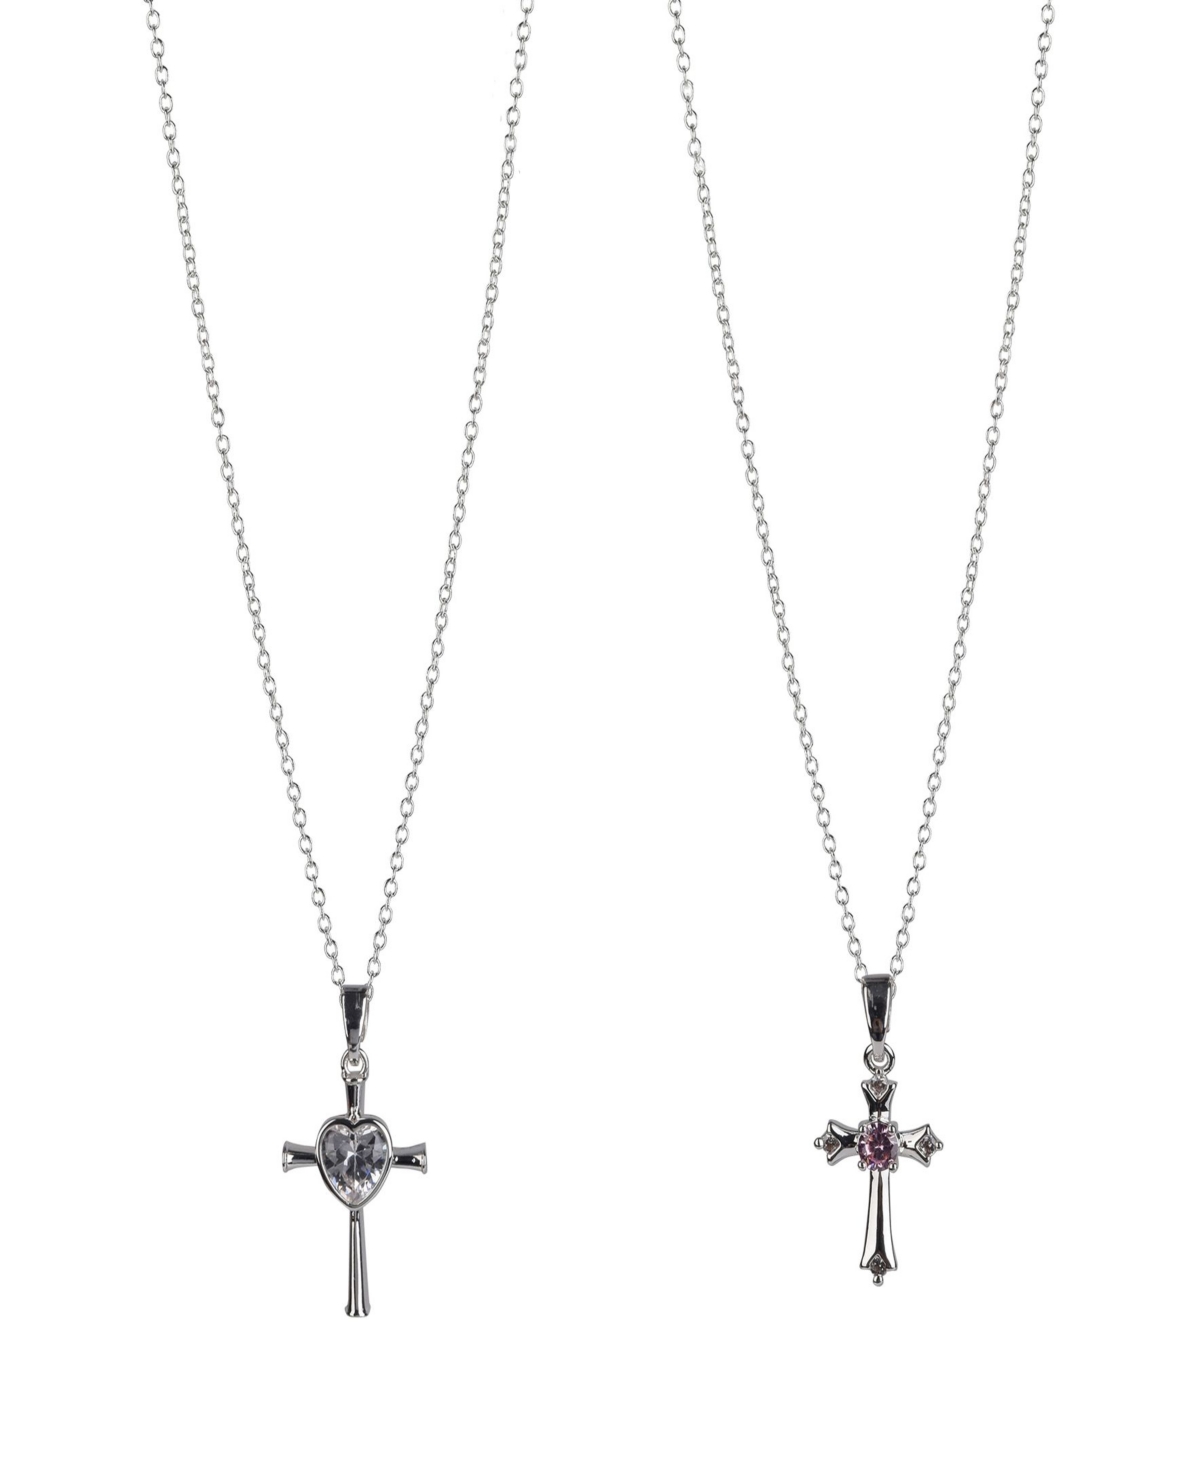 Fine Silver Plated Cross Pendant Mommy and Me Necklace Set, 2 Piece - Pink